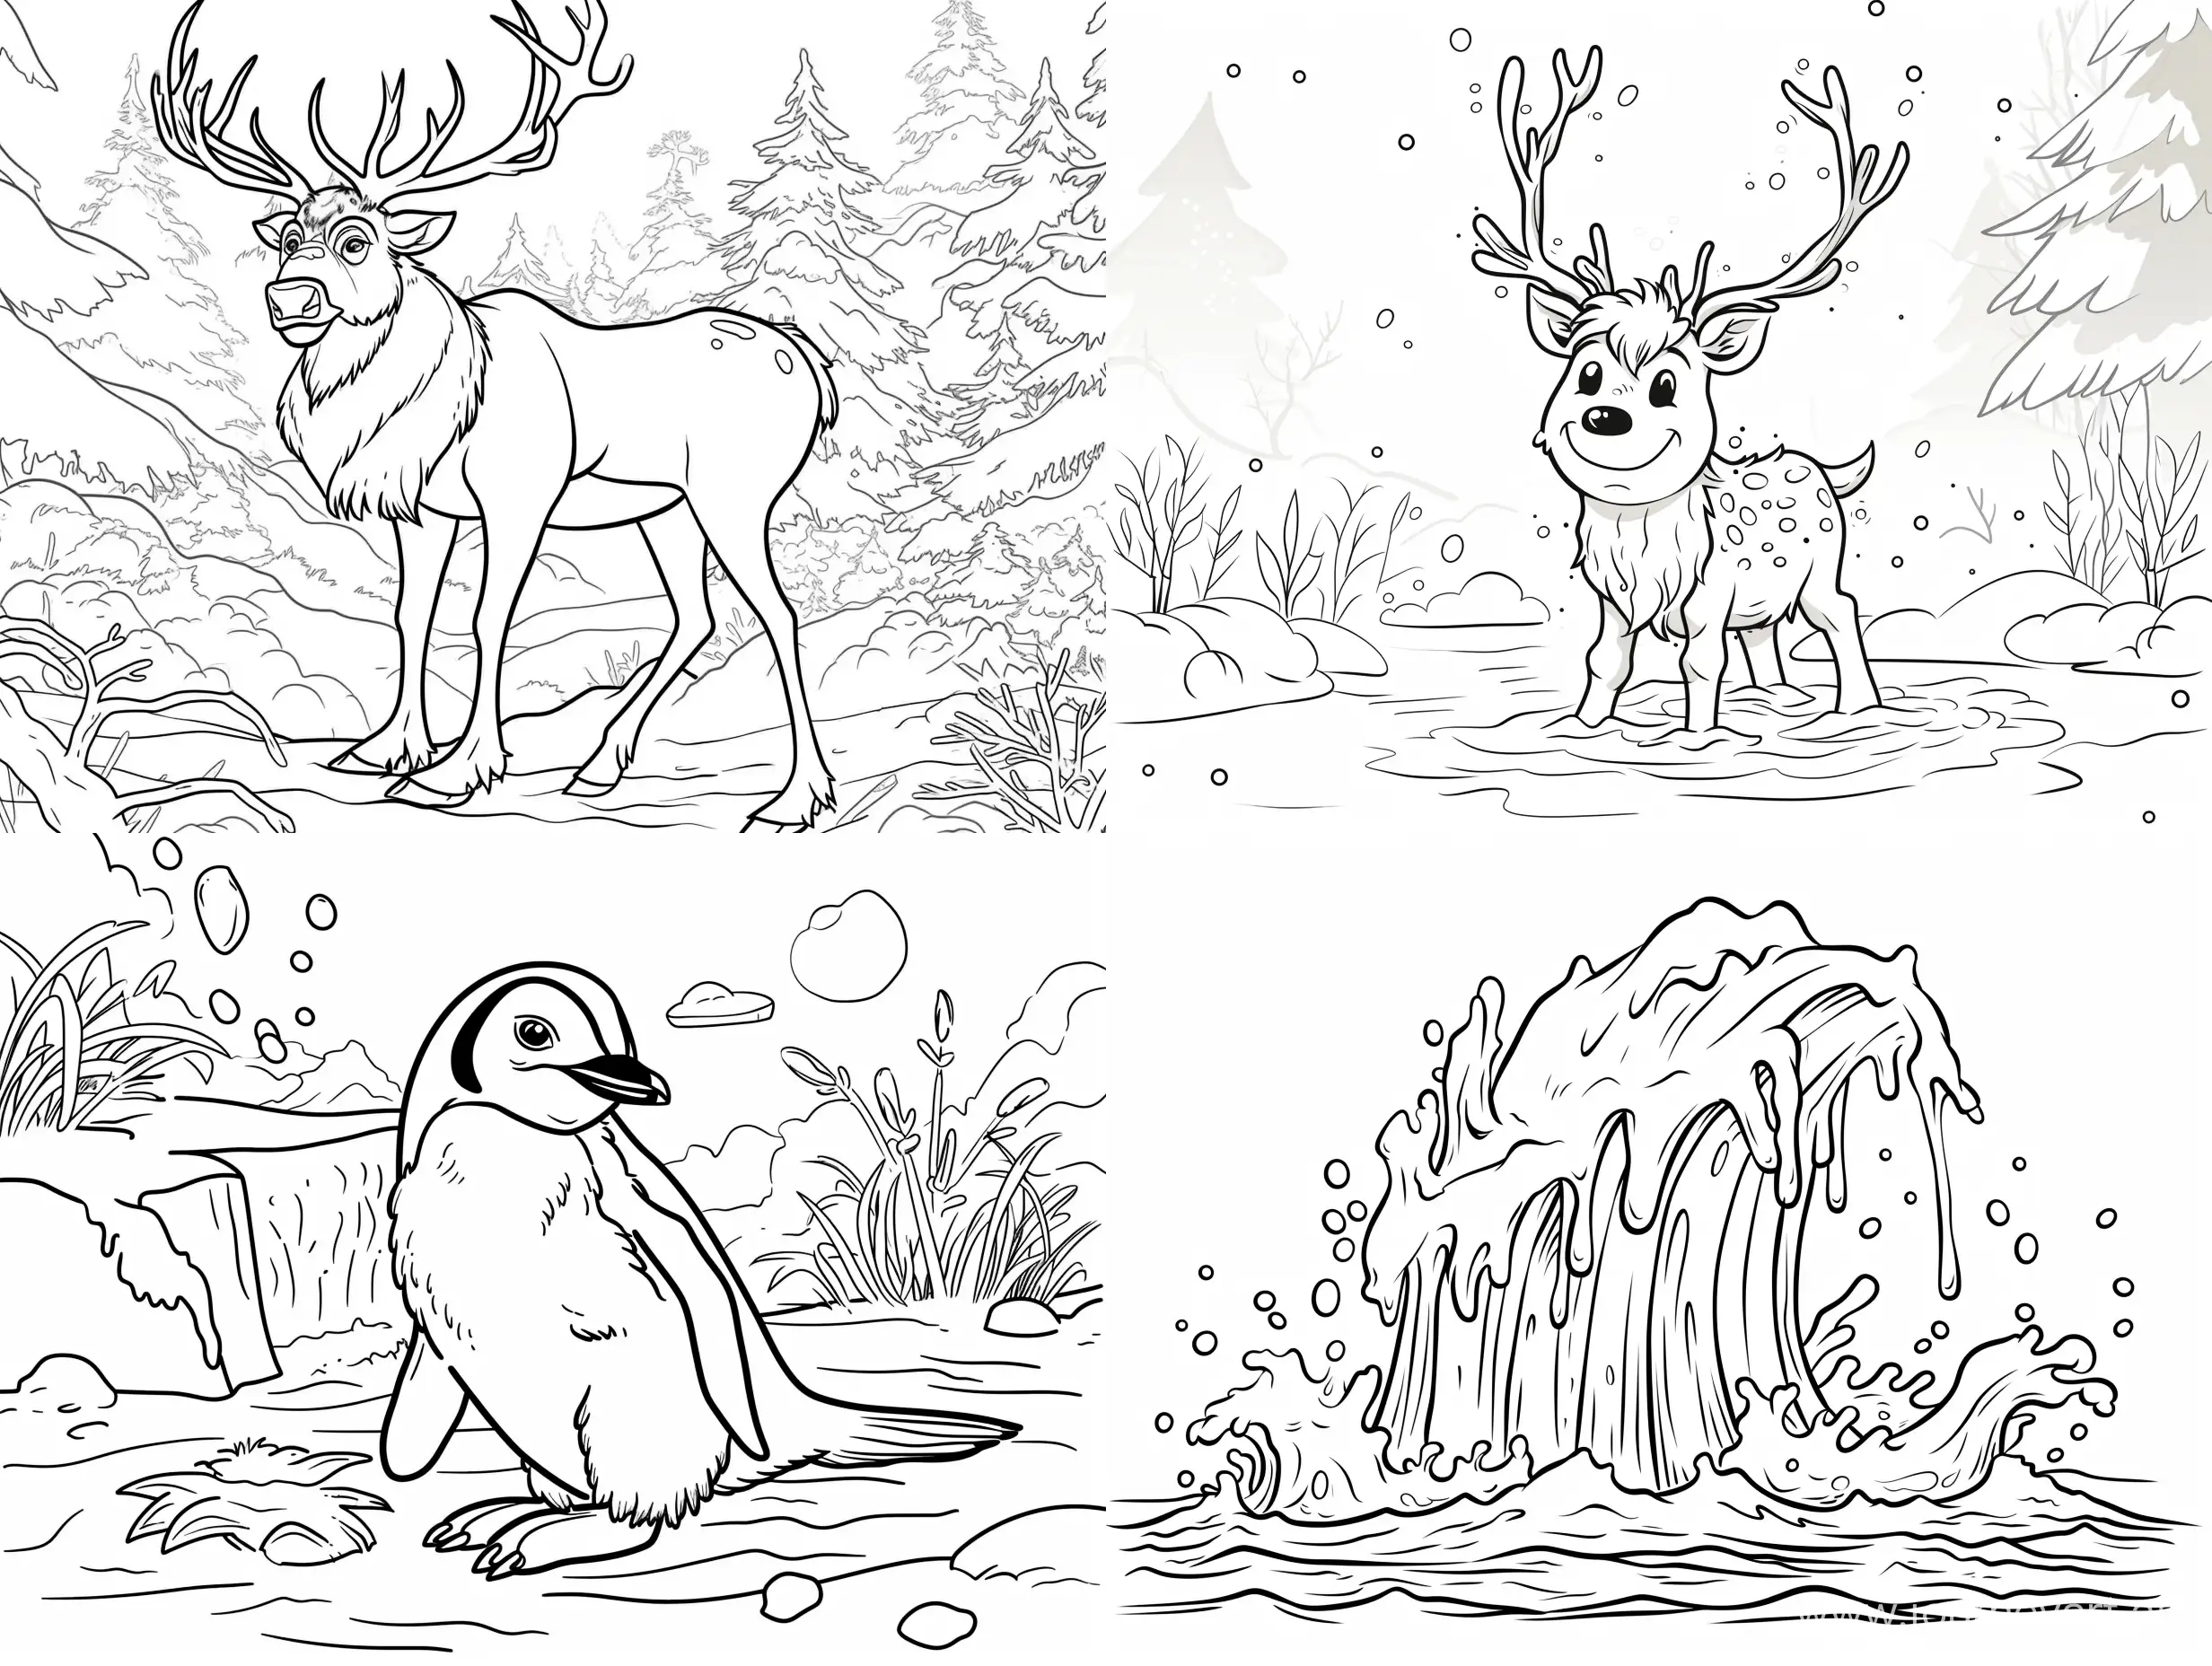 Soviet-Cartoon-Style-Coloring-Page-Spirit-of-Water-in-a-Frozen-Setting